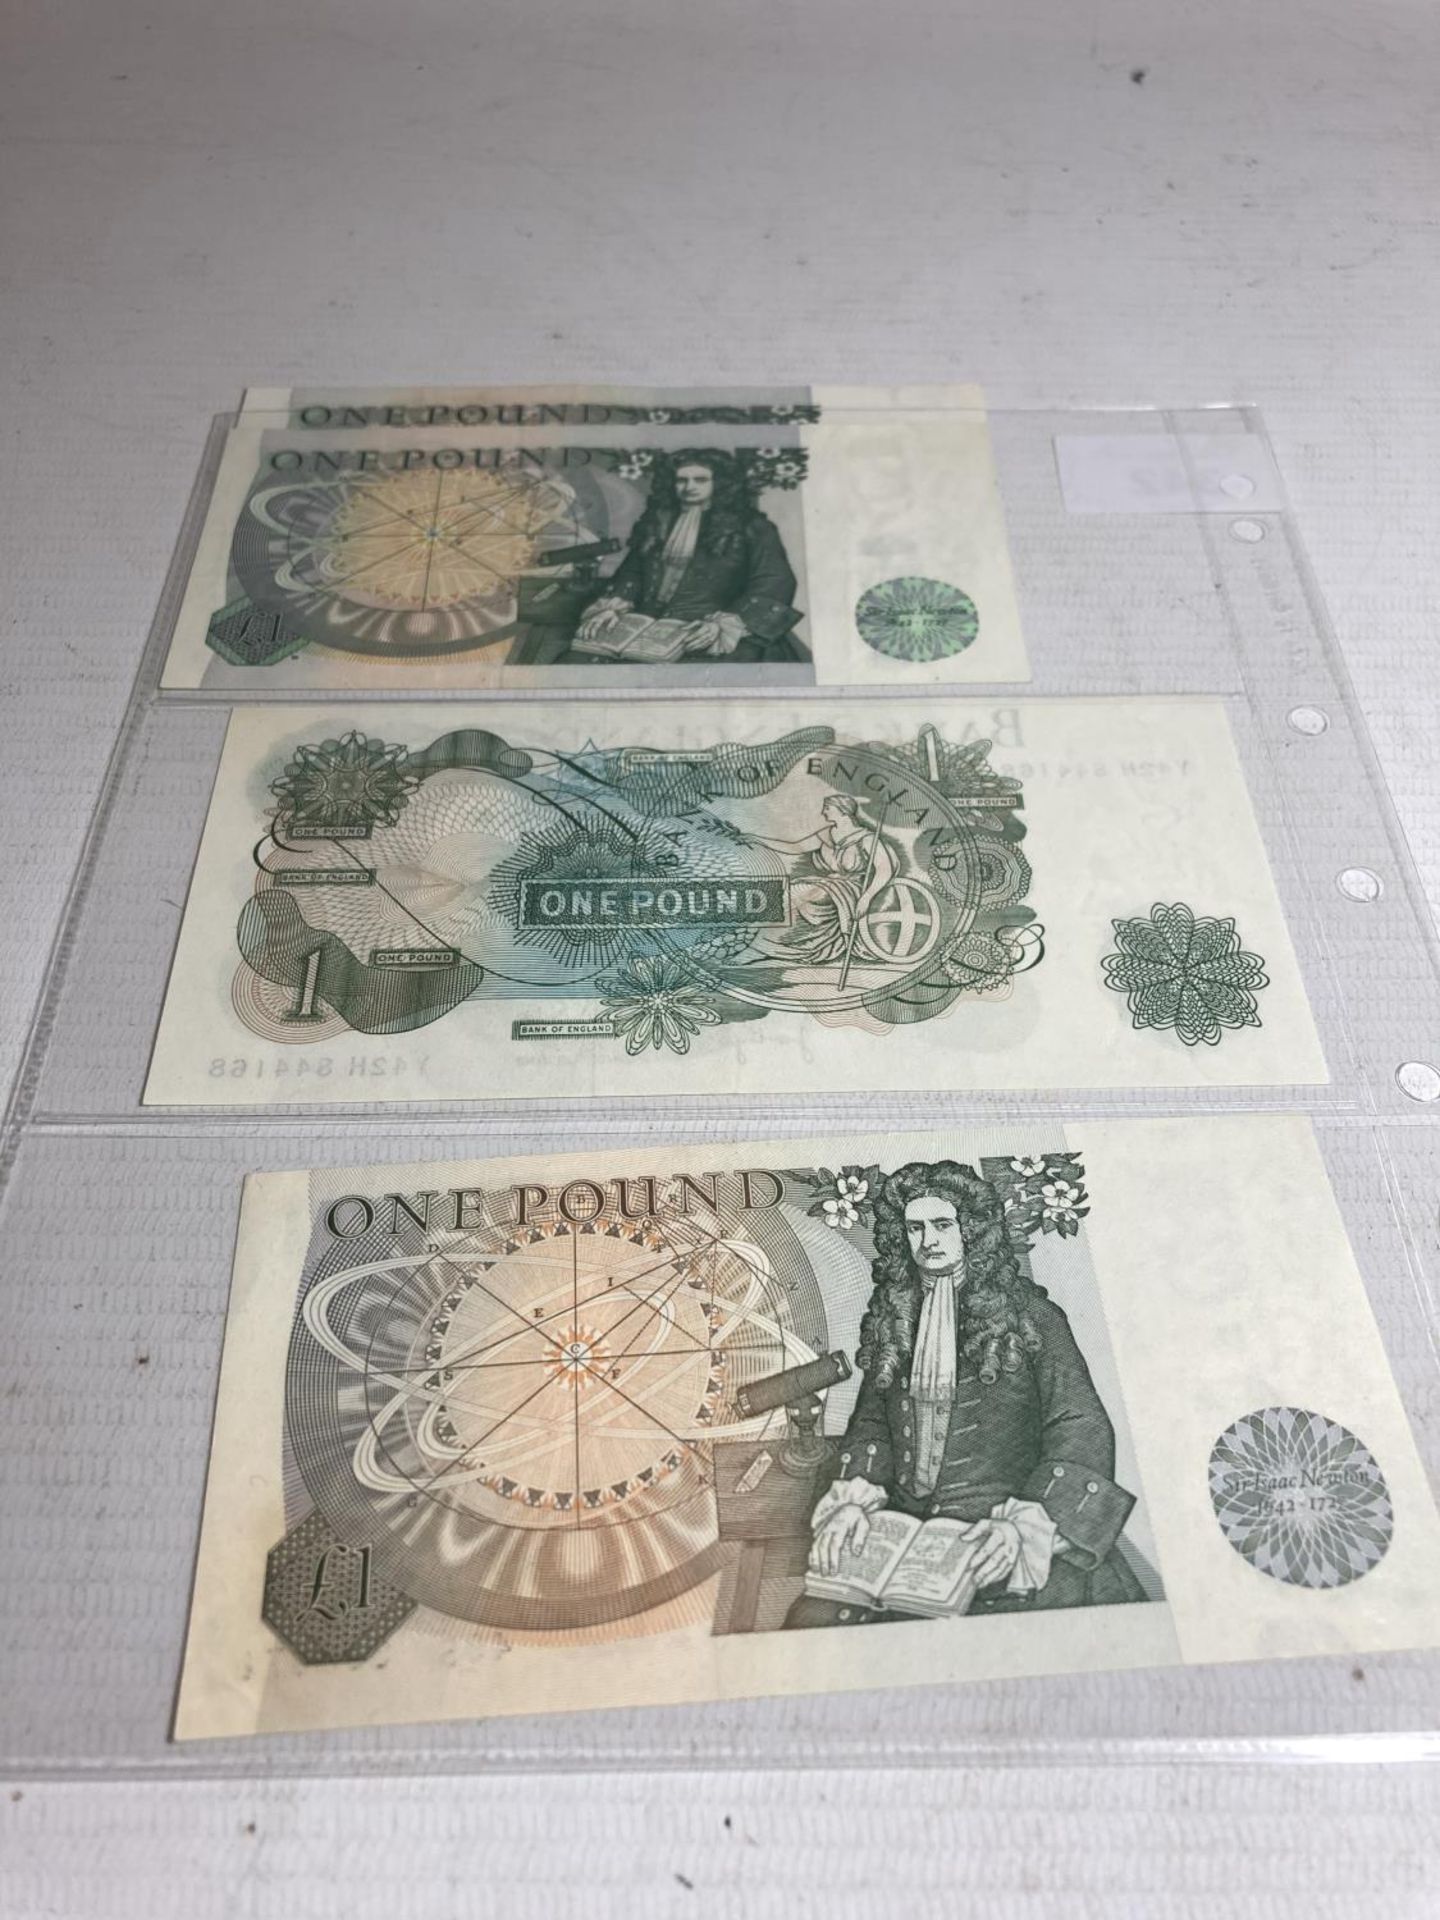 FOUR BANK OF ENGLAND ONE POUND NOTES TWO SIGNED PAGE (1970-1980) AND TWO SOMERSET (1980-1988) - Image 7 of 7